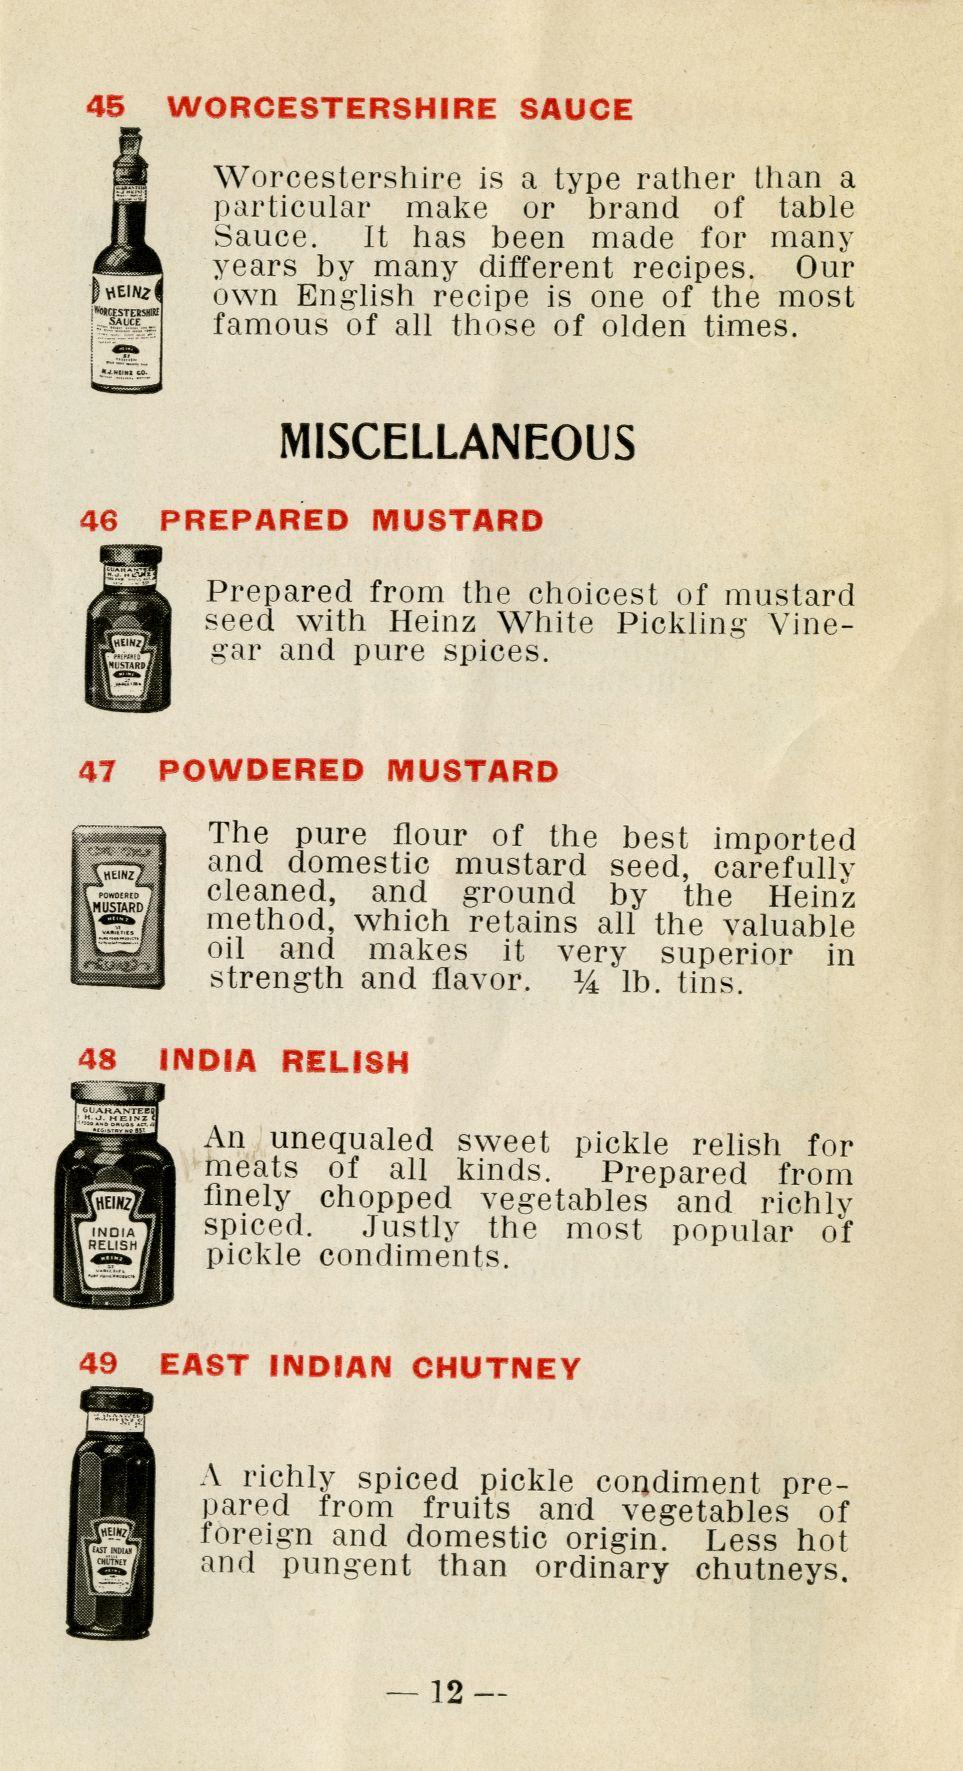 45 WORCESTERSHIRE SAUCE Worcestershire is a type rather than a particular make or brand of table Sauce. It has been made for many years by many different recipes.